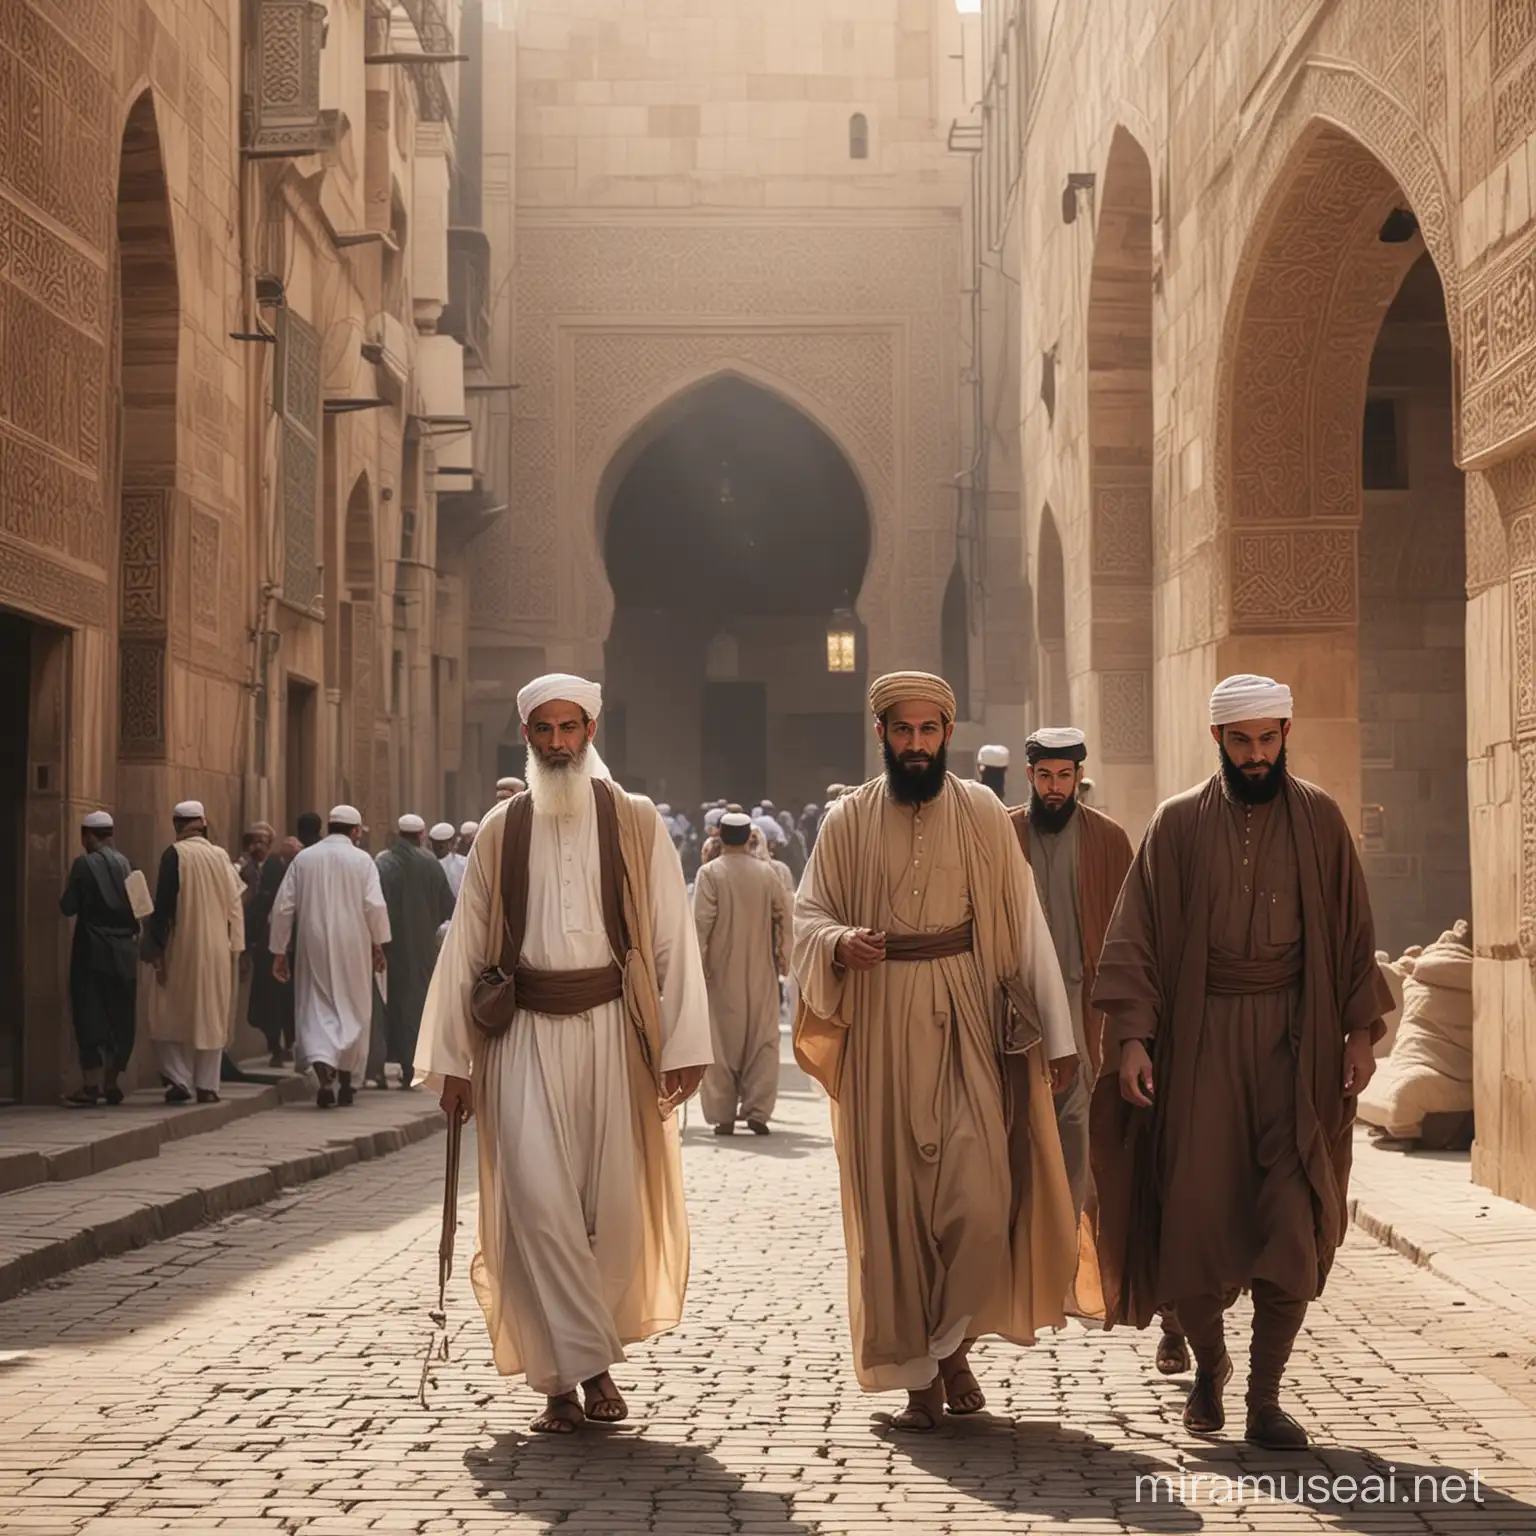 Ancient Muslim Men Praying at Mosque and Strolling Through Marketplace